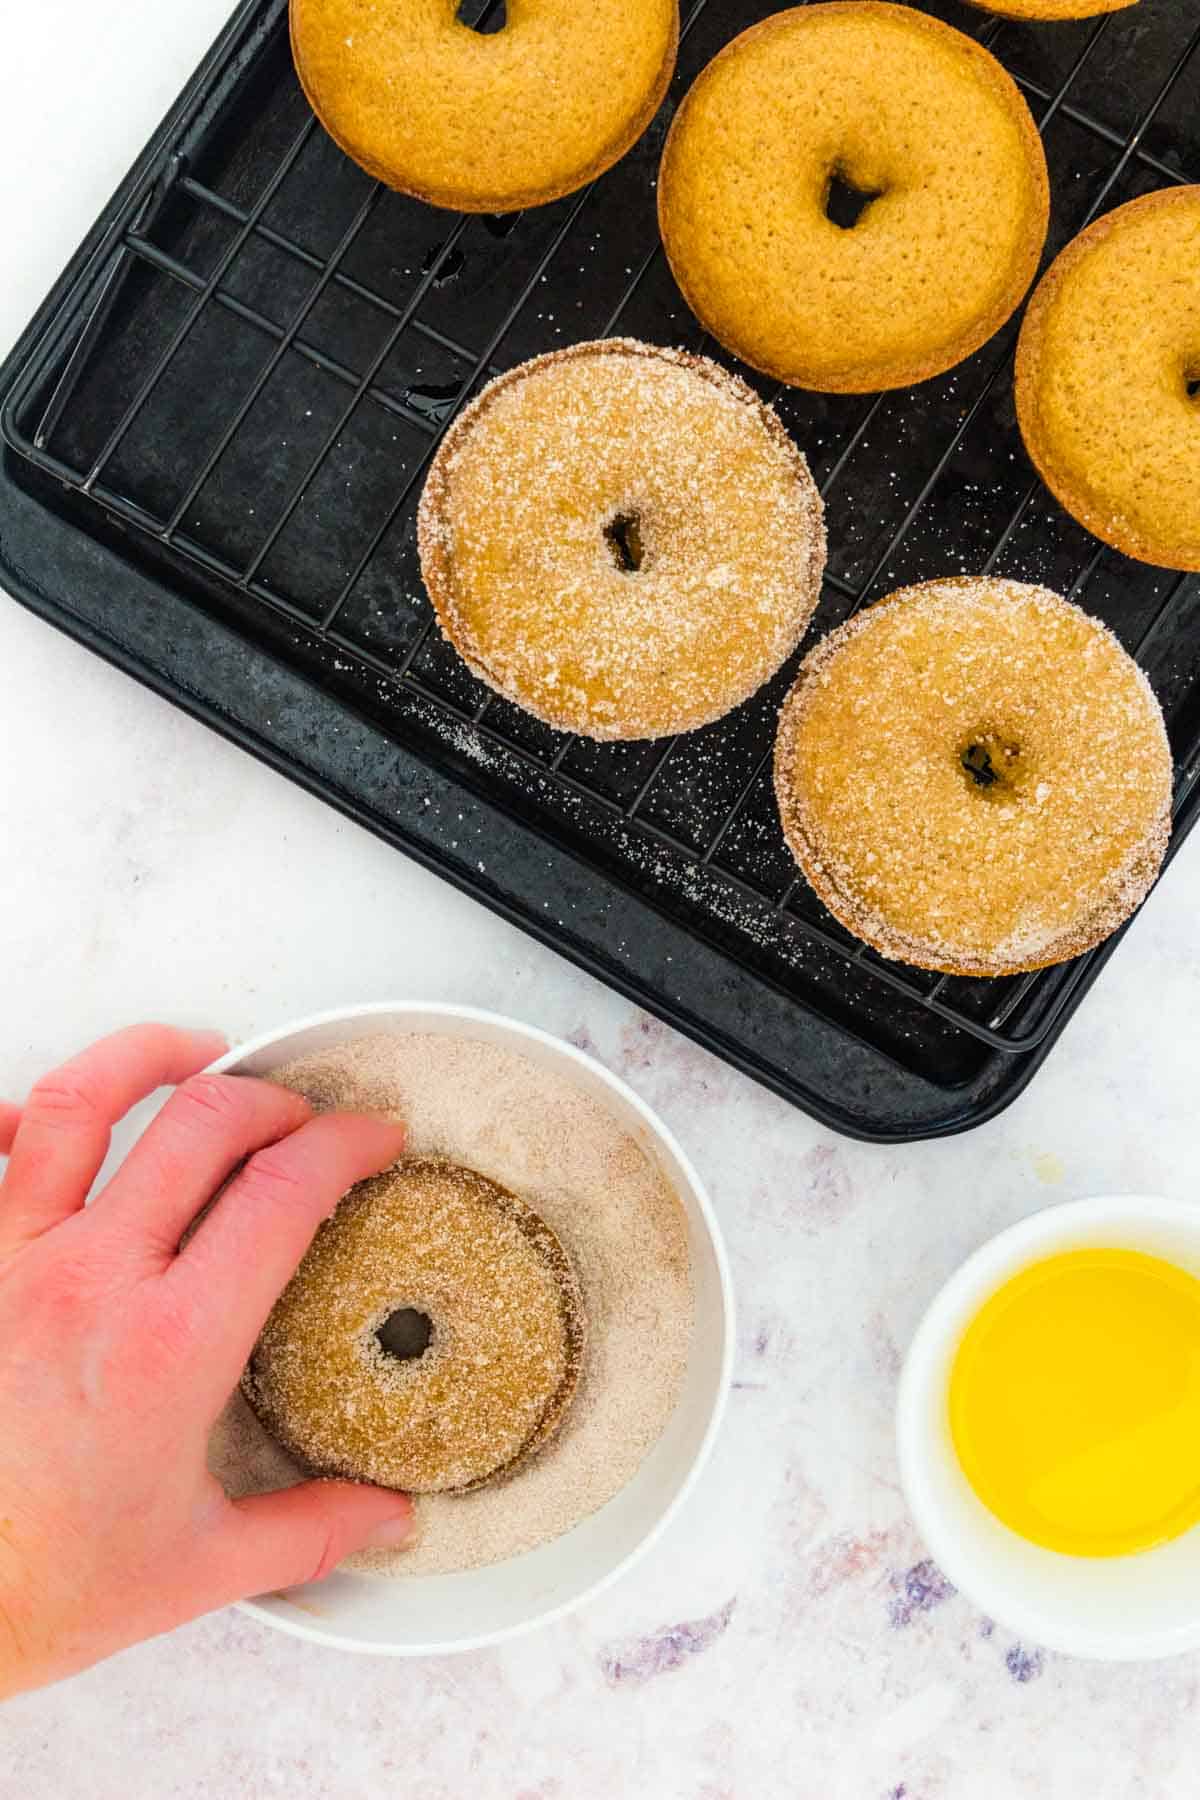 An apple cider donut is dipped into a bowl of cinnamon sugar, next to a tray of plain donuts.